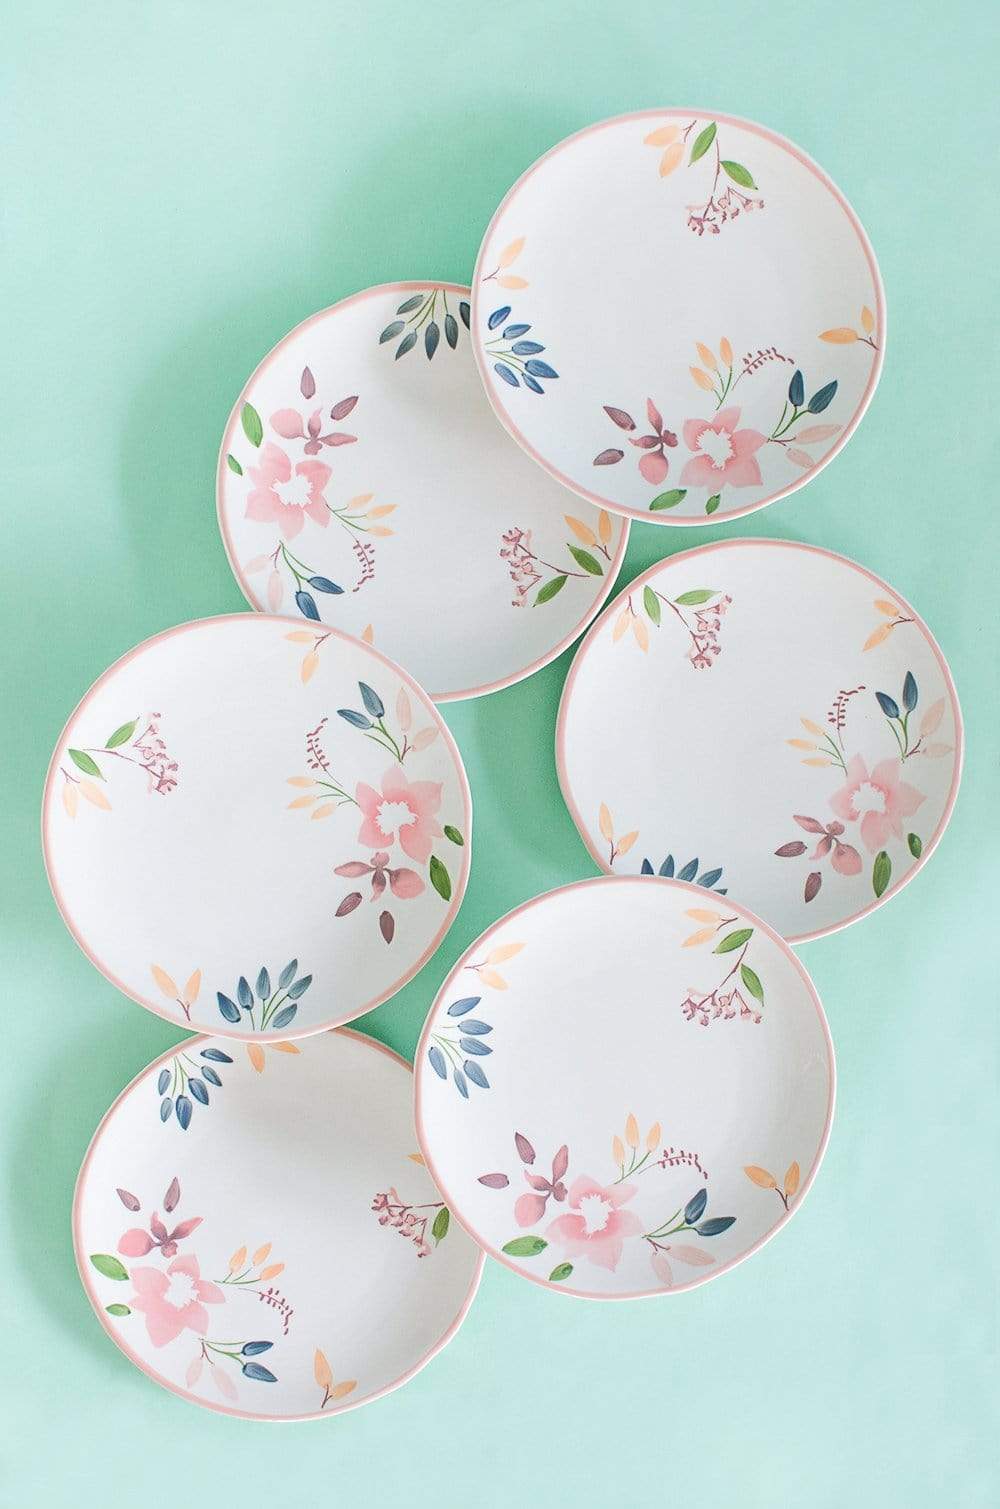 Floral Lace Handpainted Dinner Plates- Set of 6 - 8 inches